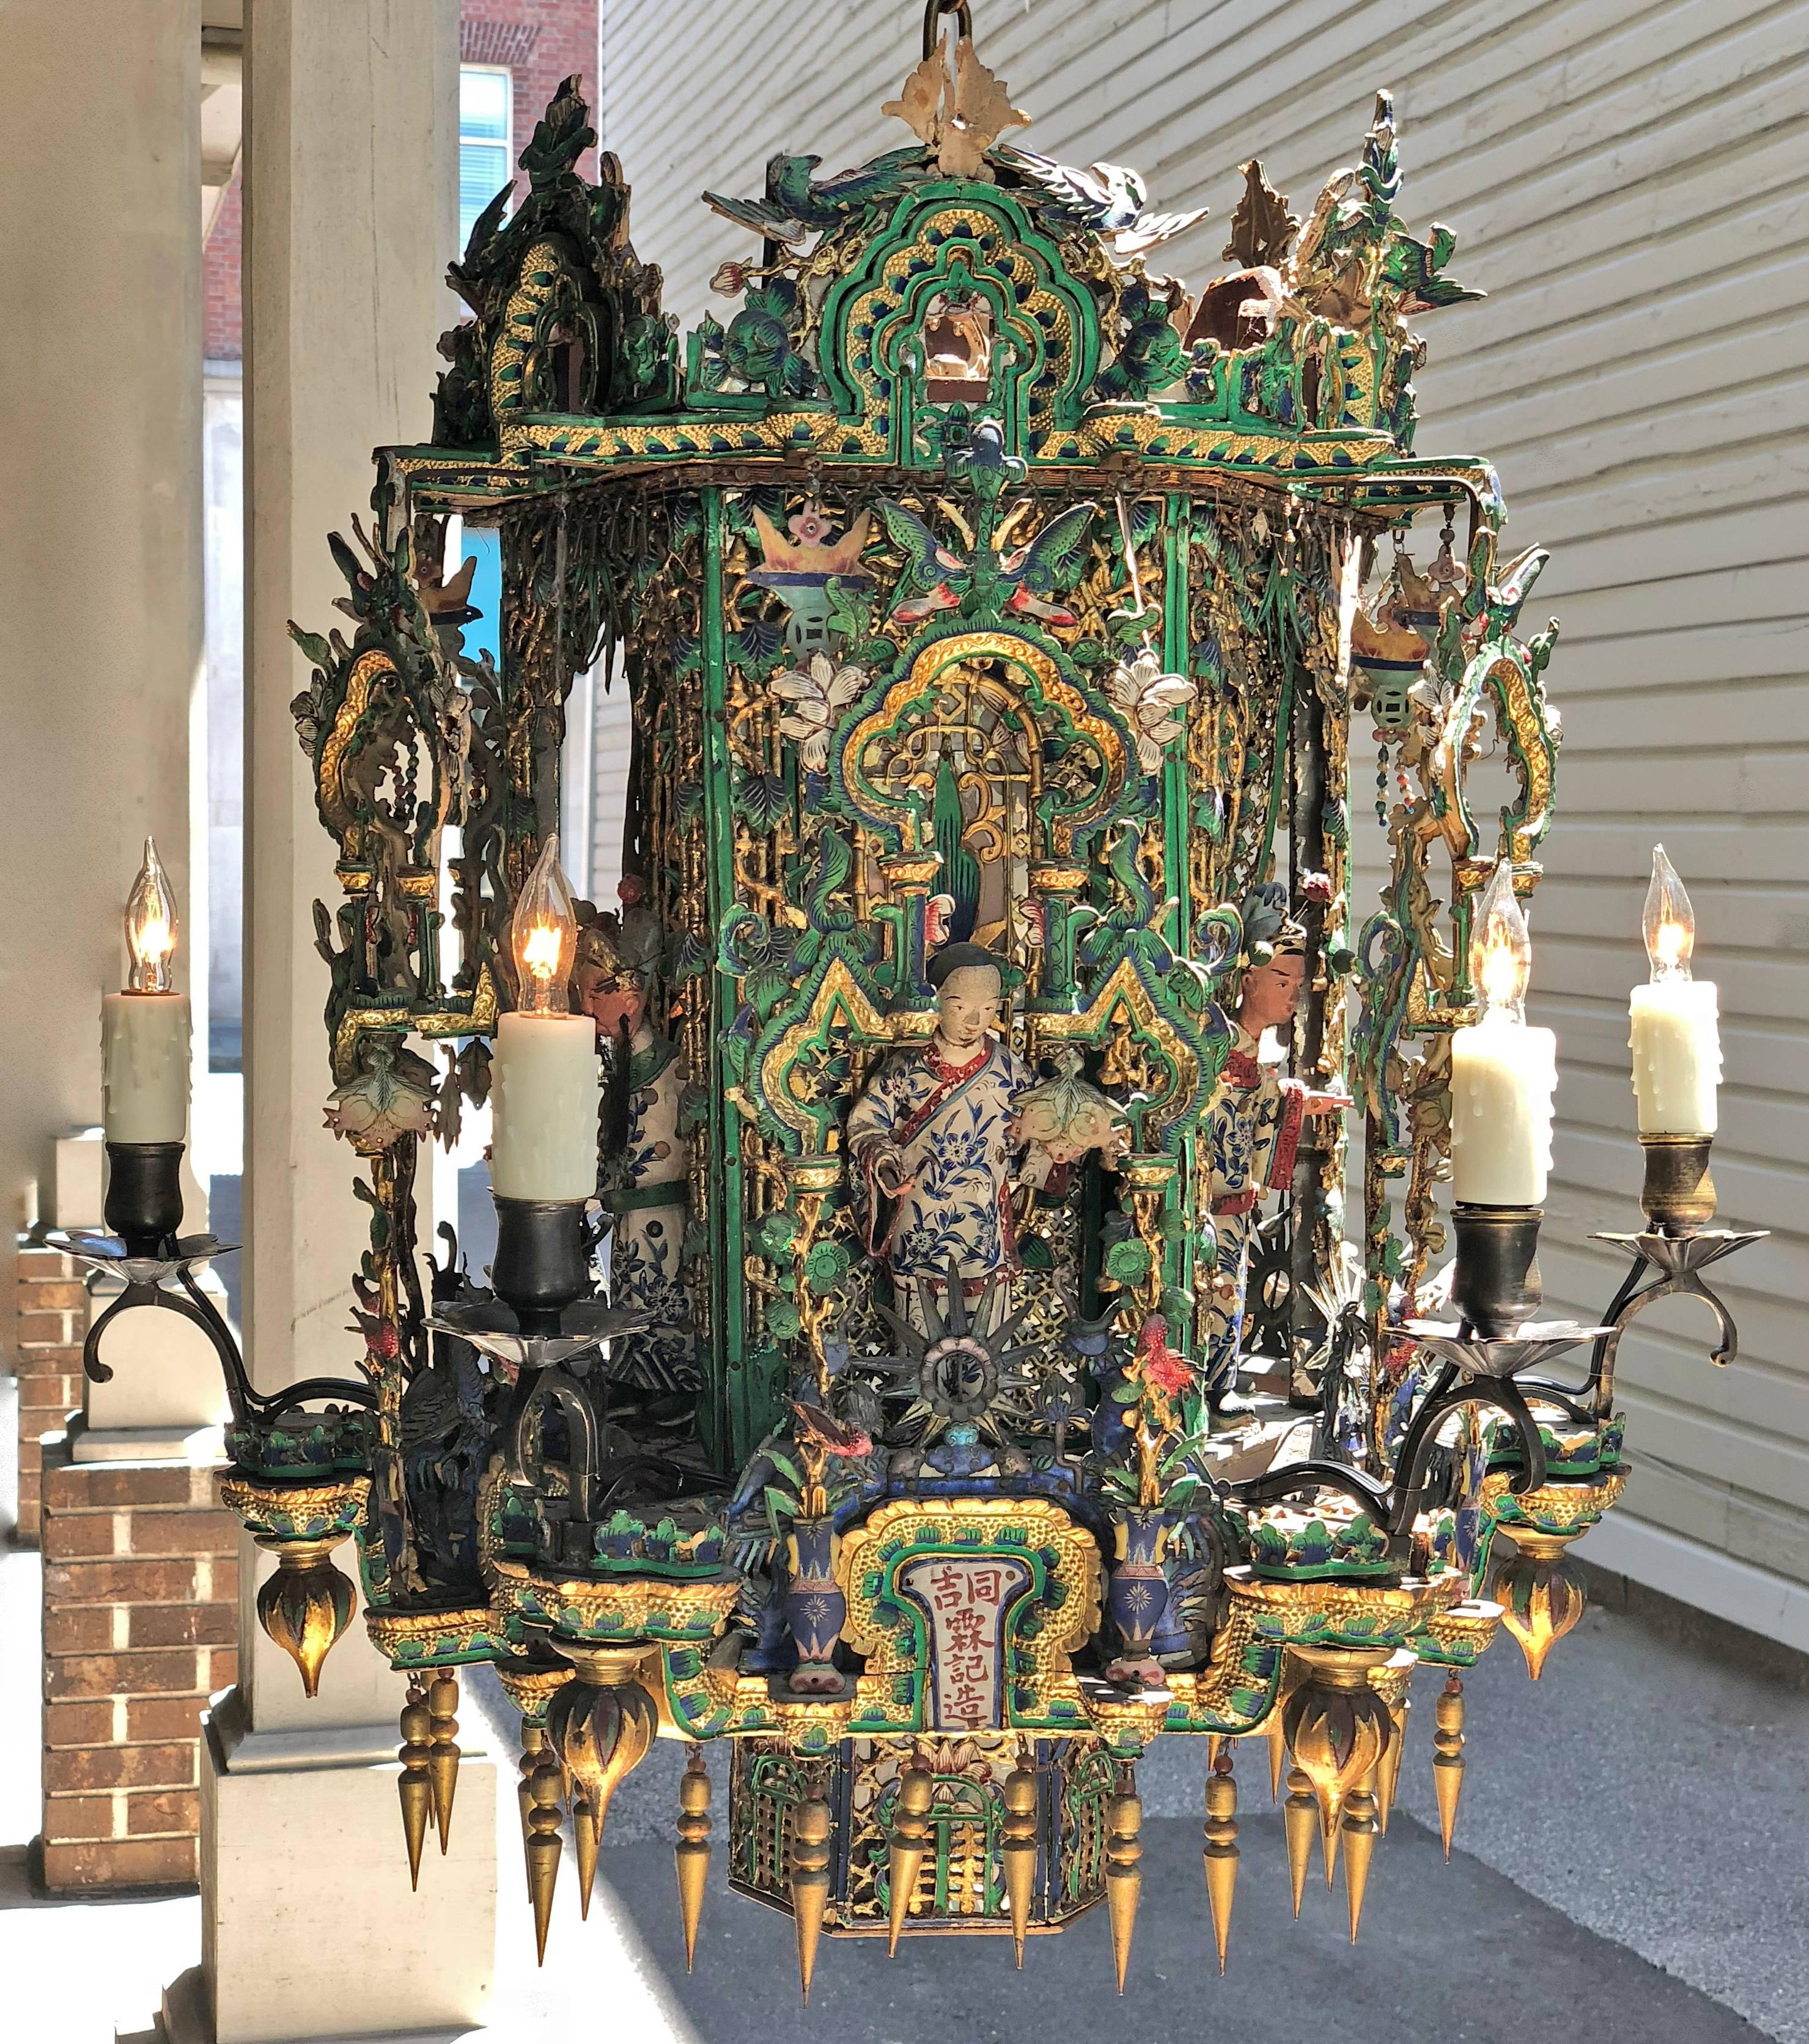 One-of-a-kind 19th century Chinese lantern made out of wood, paper mache ( Papier-mâché), mirror, brass, and cloisonne. It was originally candled but has since been rewired and electrified. 
This Asian hexagonal lantern has temple arches framing